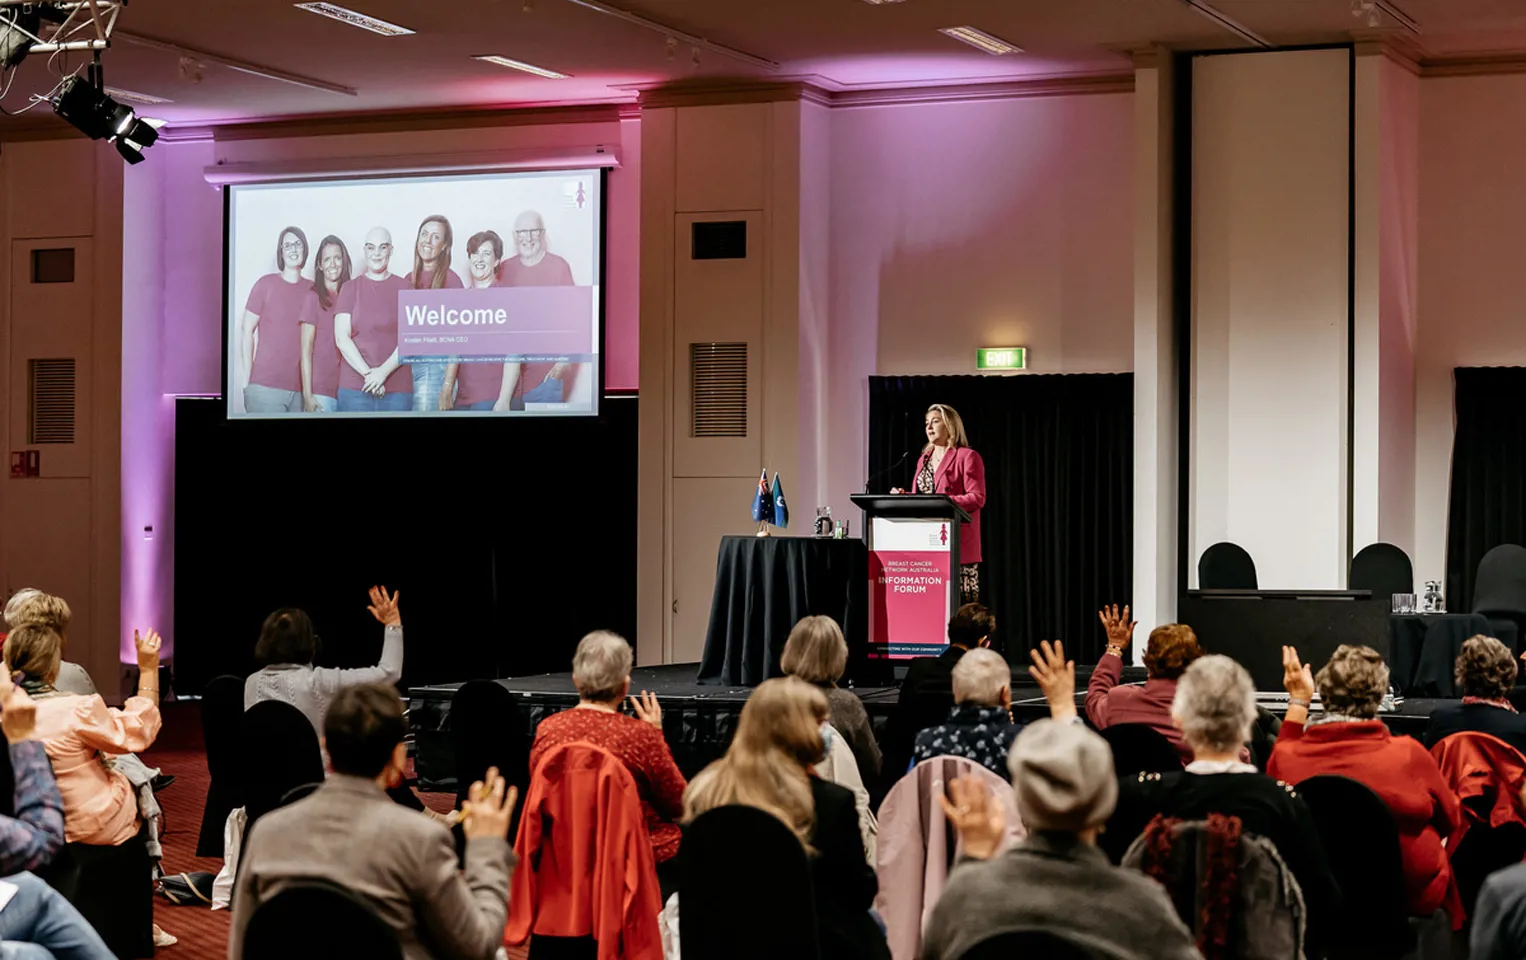 Photo from BCNA's first national conference, showing the presenter at a lectern and the backs of attendees' heads in the audience